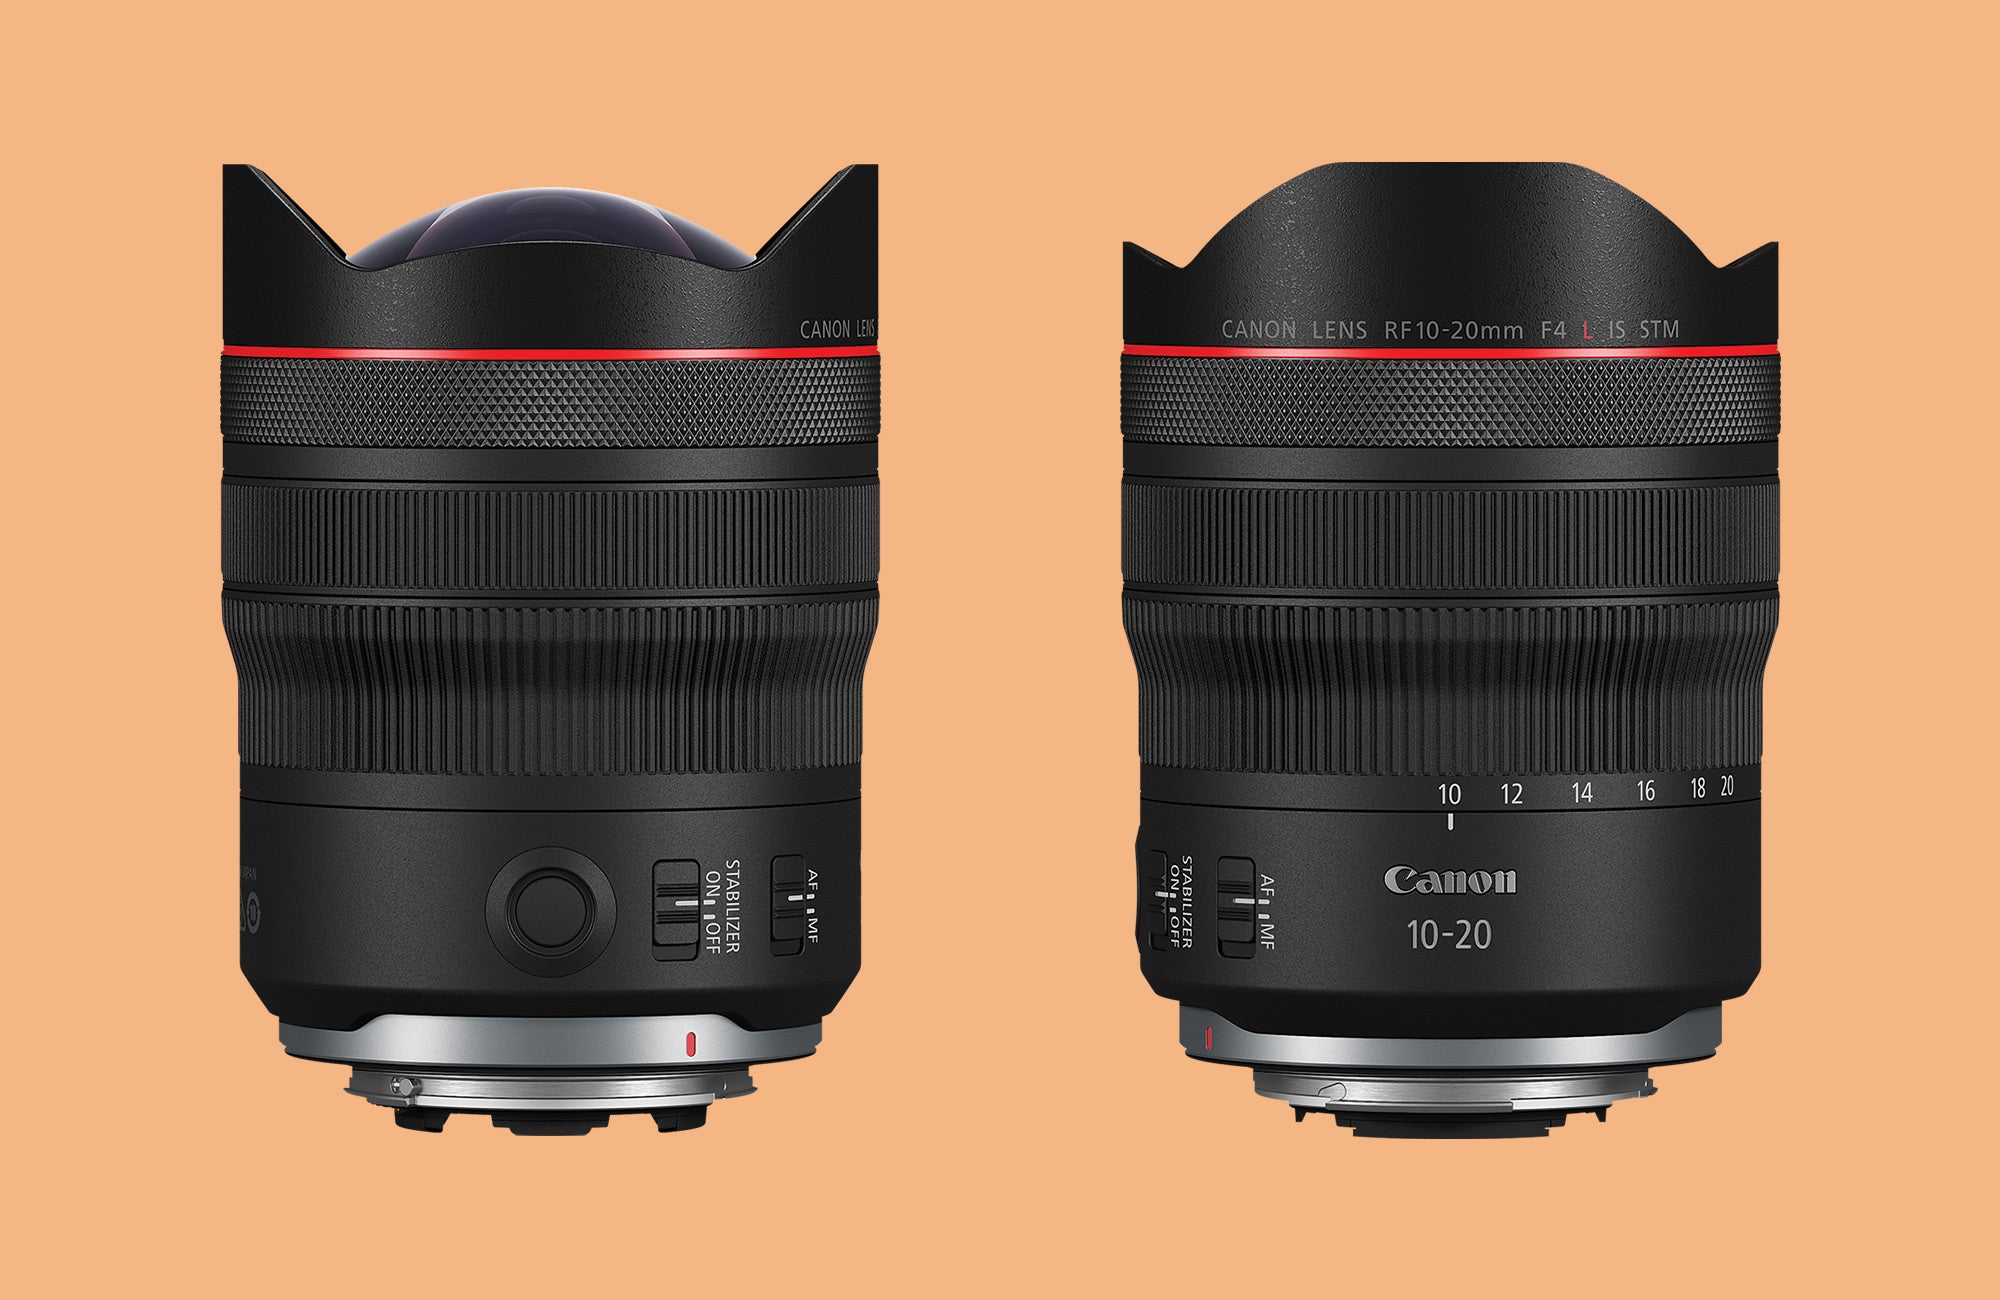 New gear: Canon RF 10-20mm f/4 L IS USM super-wide-angle zoom lens